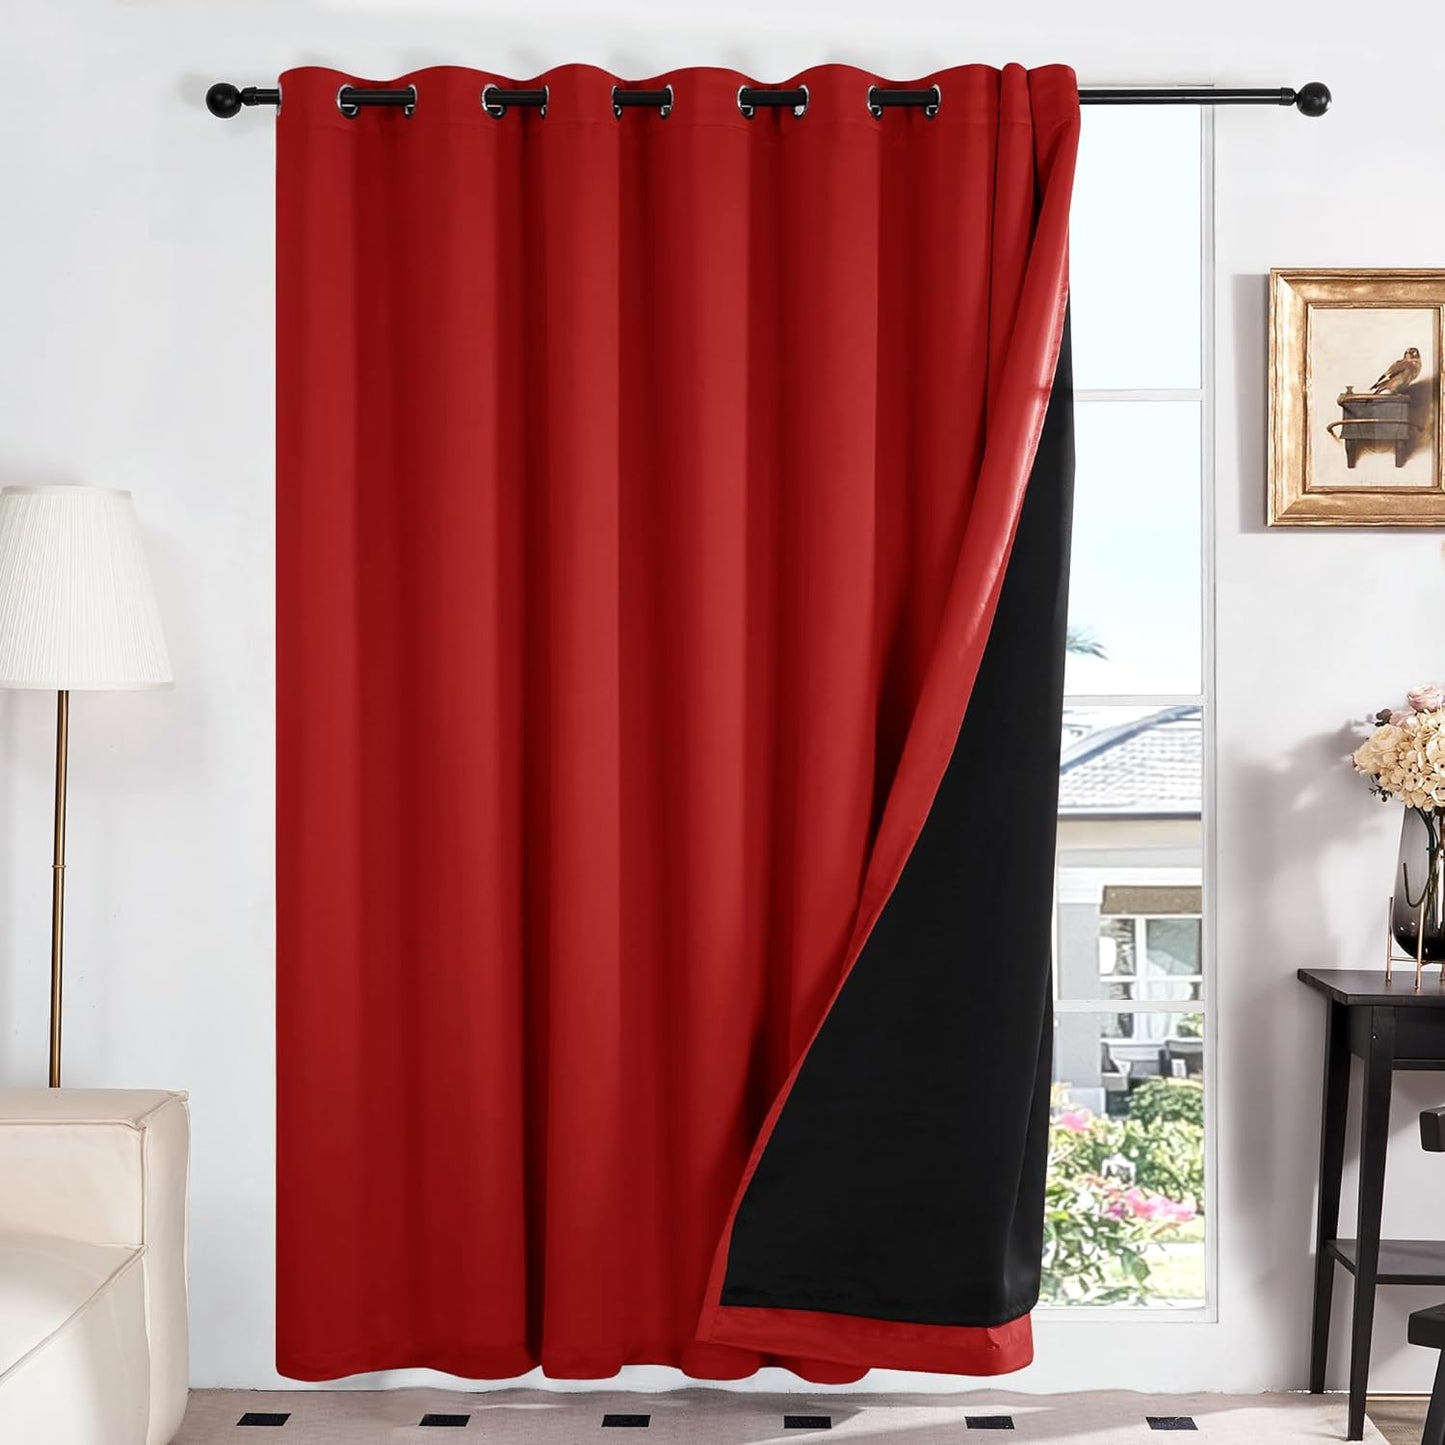 Deconovo 100% White Blackout Curtains, Double Layer Sliding Door Curtain for Living Room, Extra Wide Room Divder Curtains for Patio Door (100W X 84L Inches, Pure White, 1 Panel)  DECONOVO Bright Red 100W X 95L Inch 